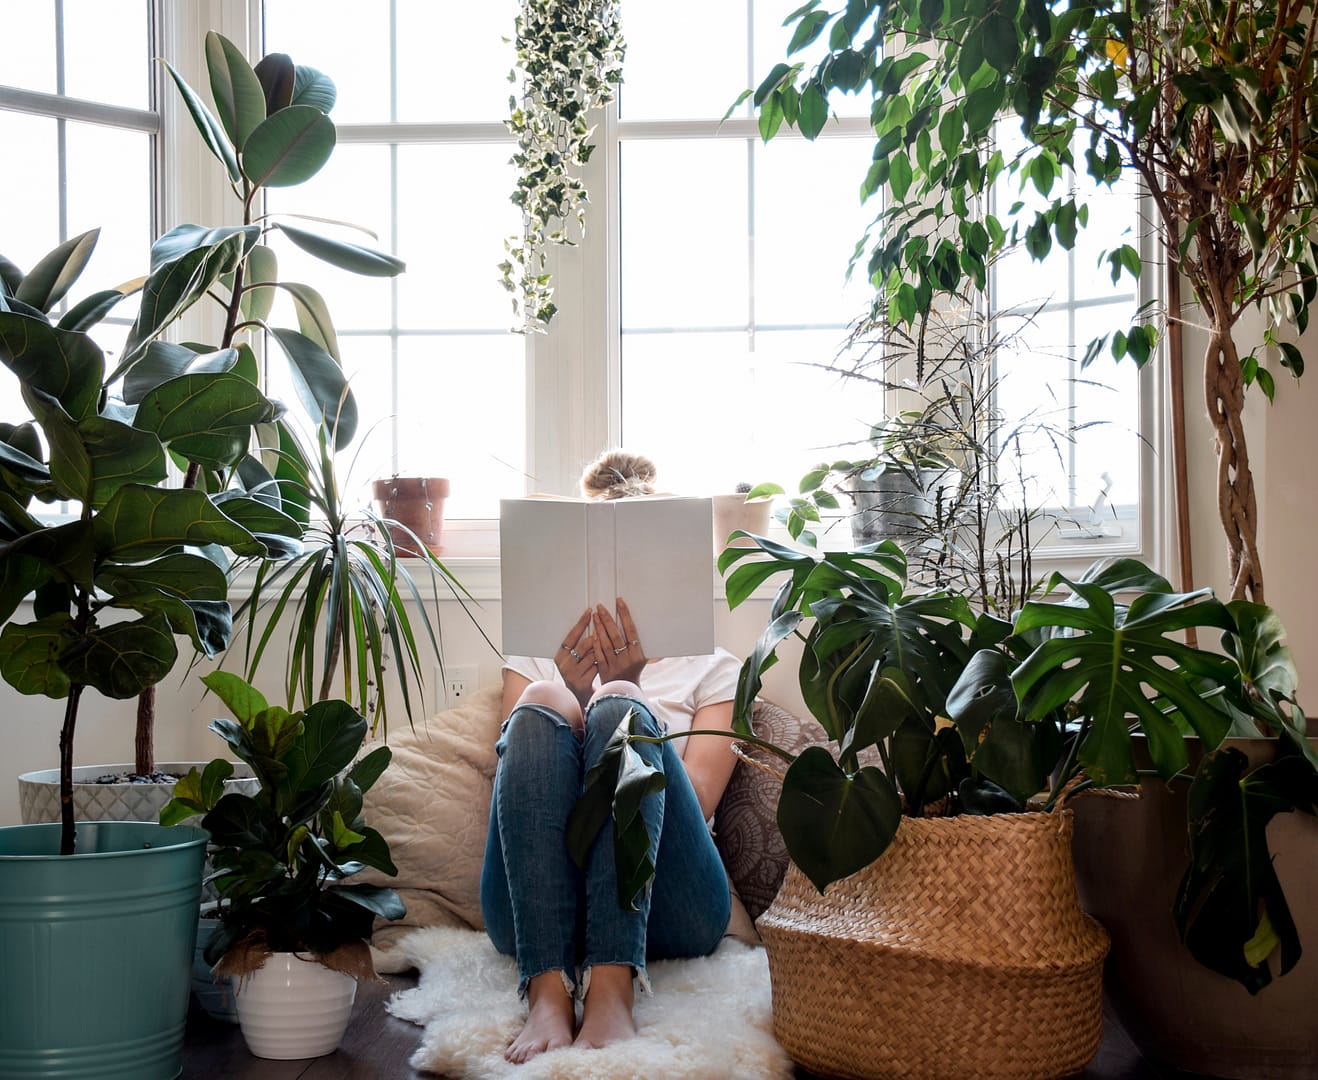 A person reading a book in a cozy corner surrounded by house plants